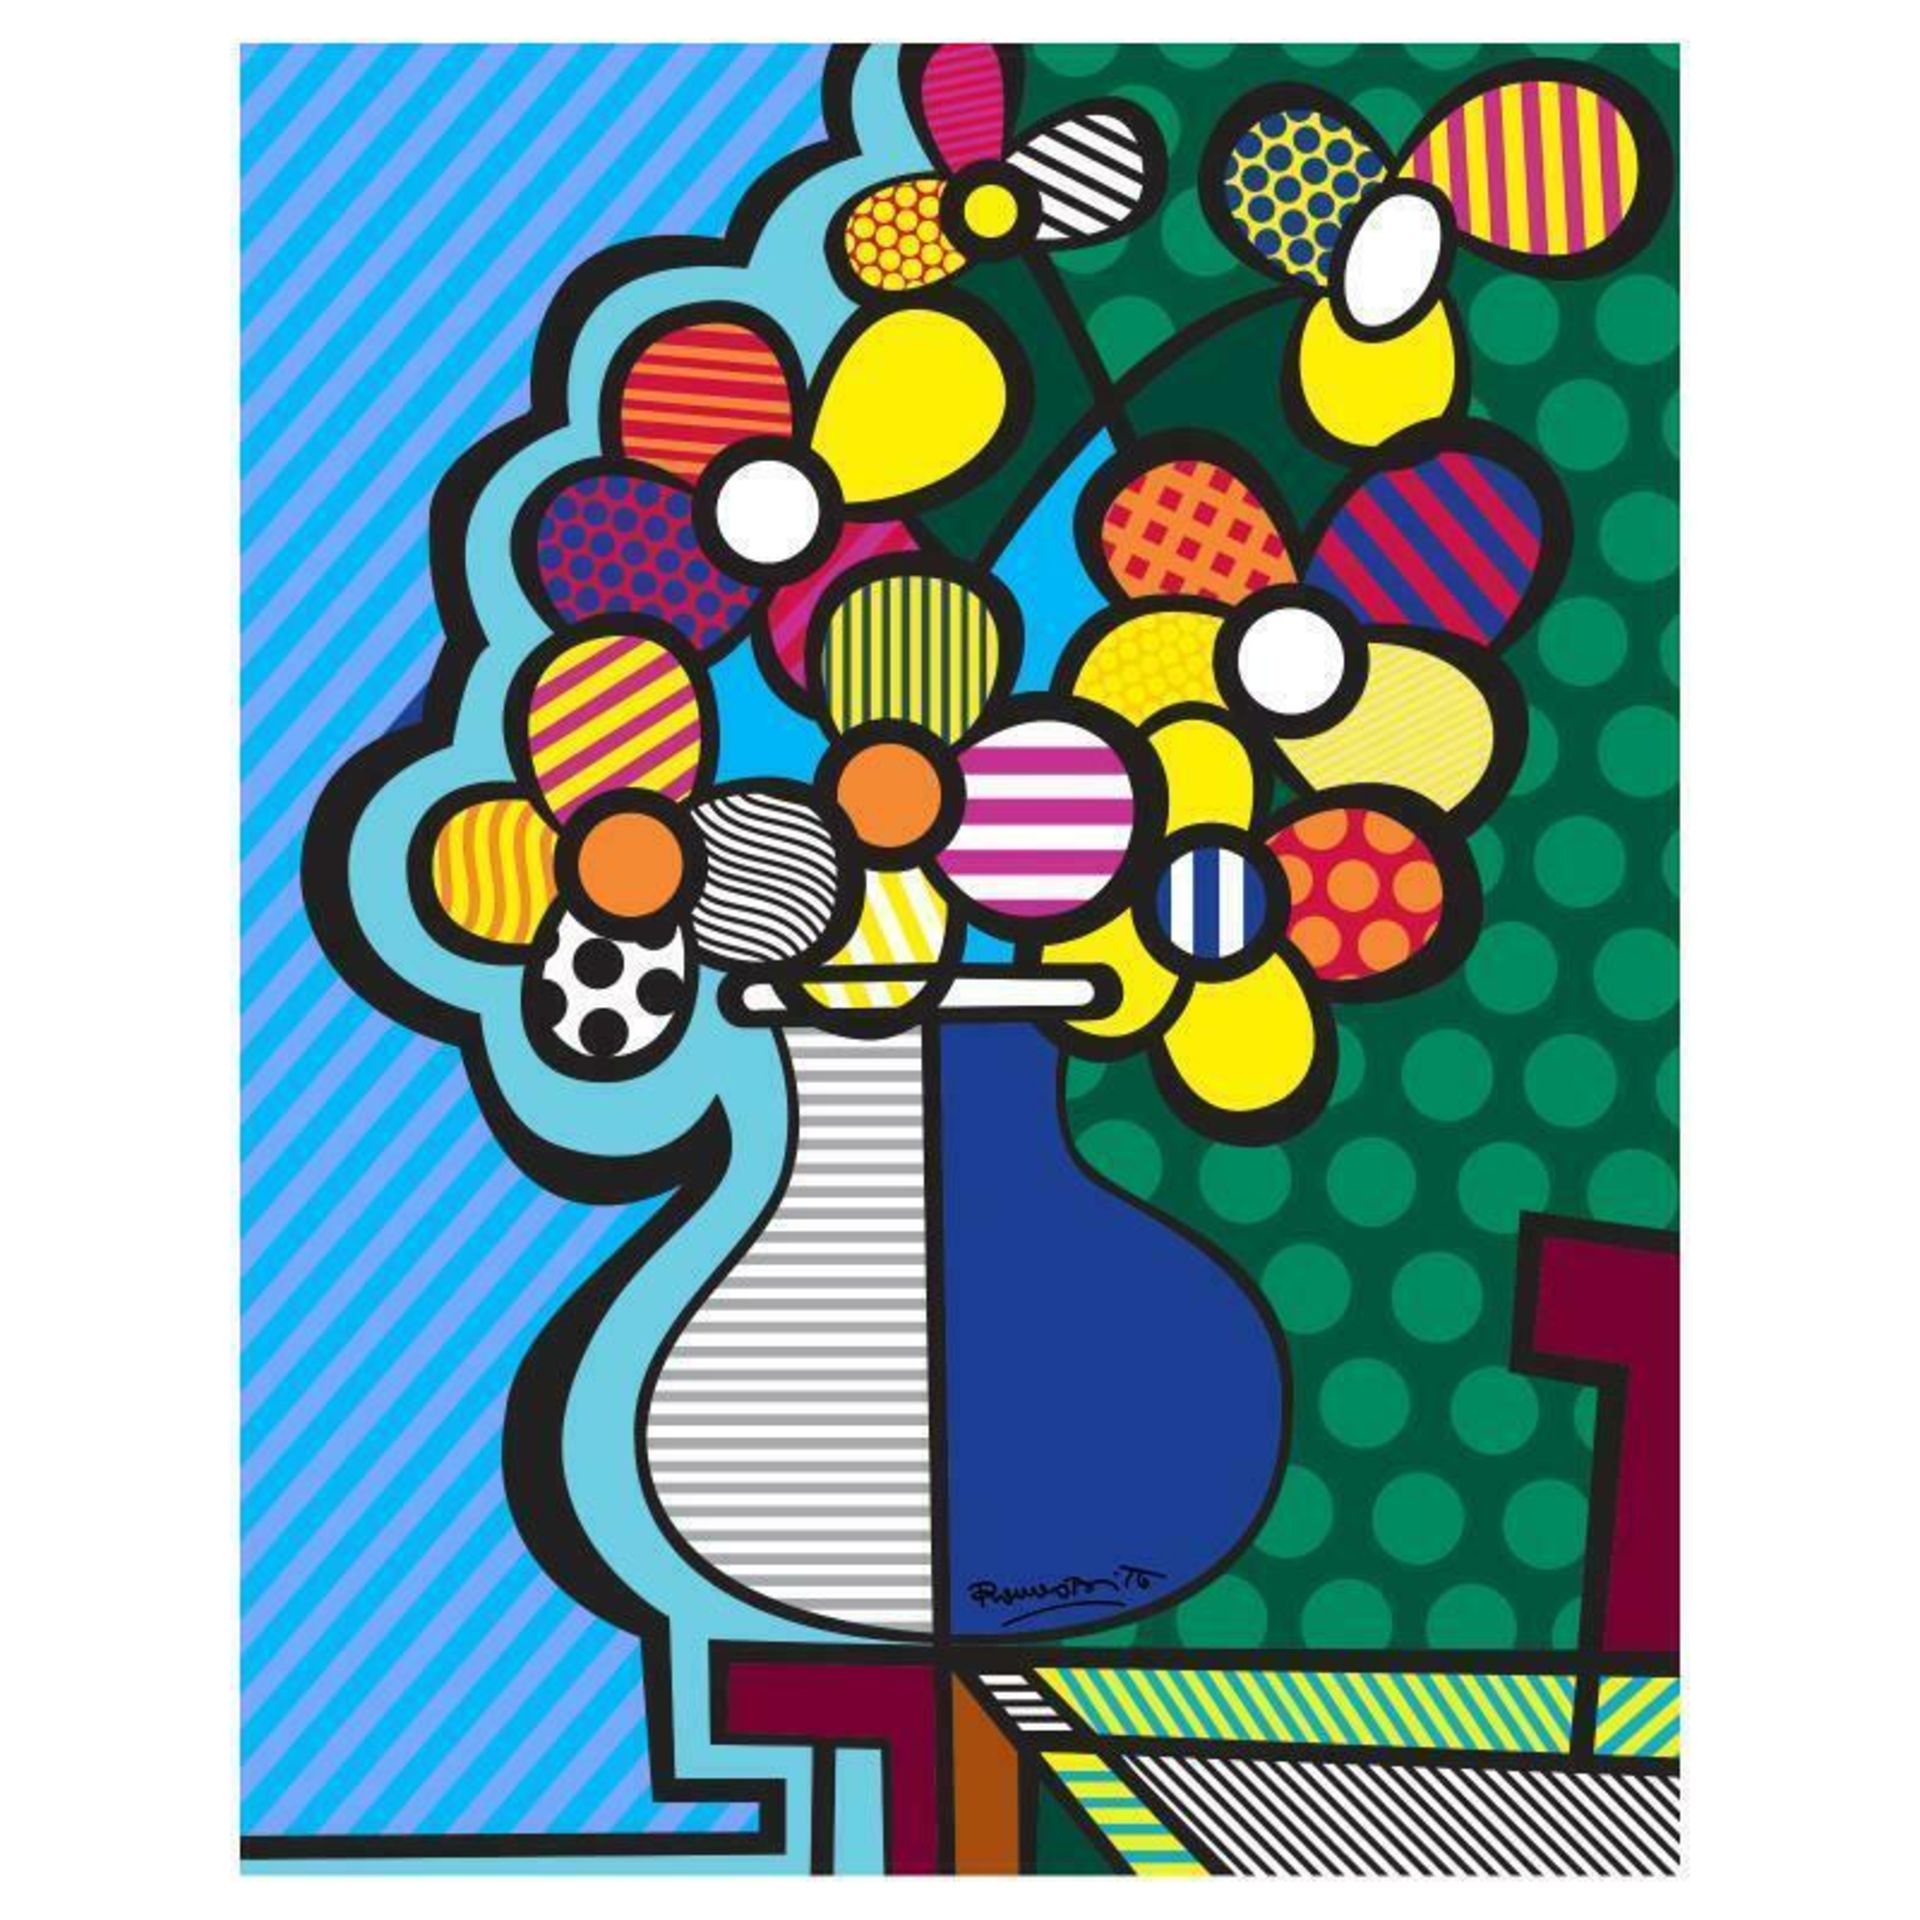 Romero Britto "New Flower" Hand Signed Giclee on Canvas; Authenticated